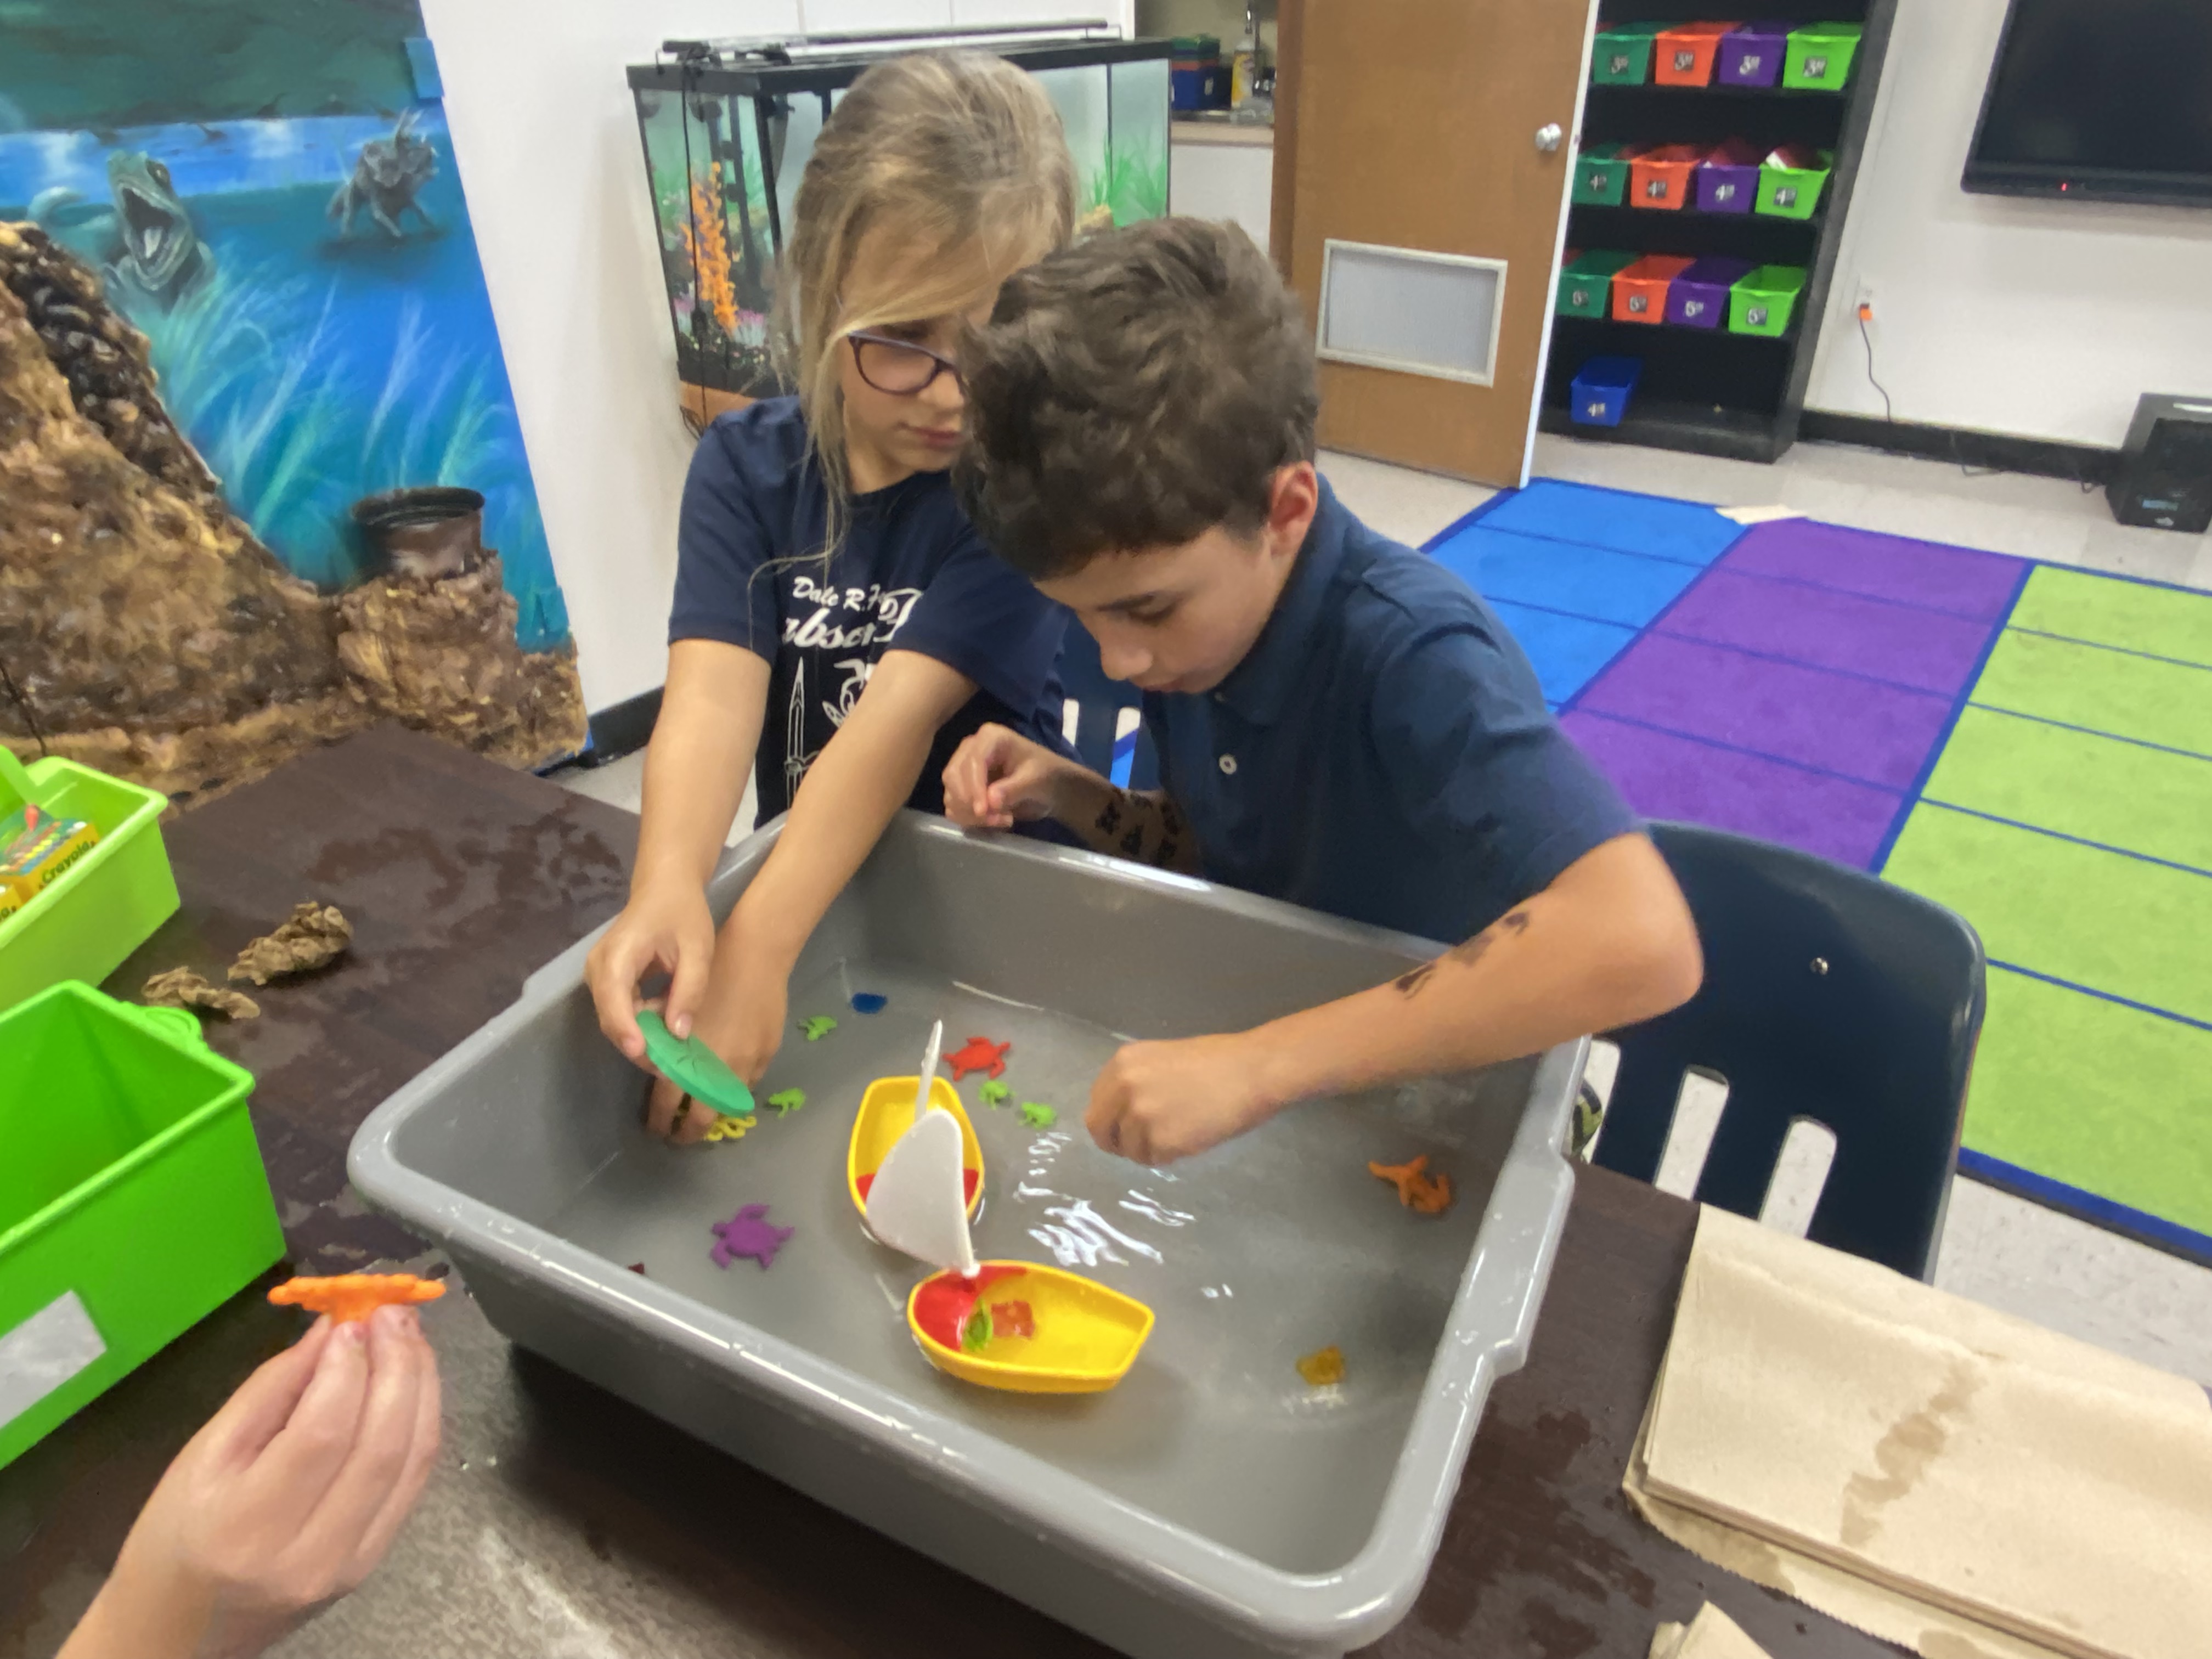 1st Grade students exploring if things sink or float.